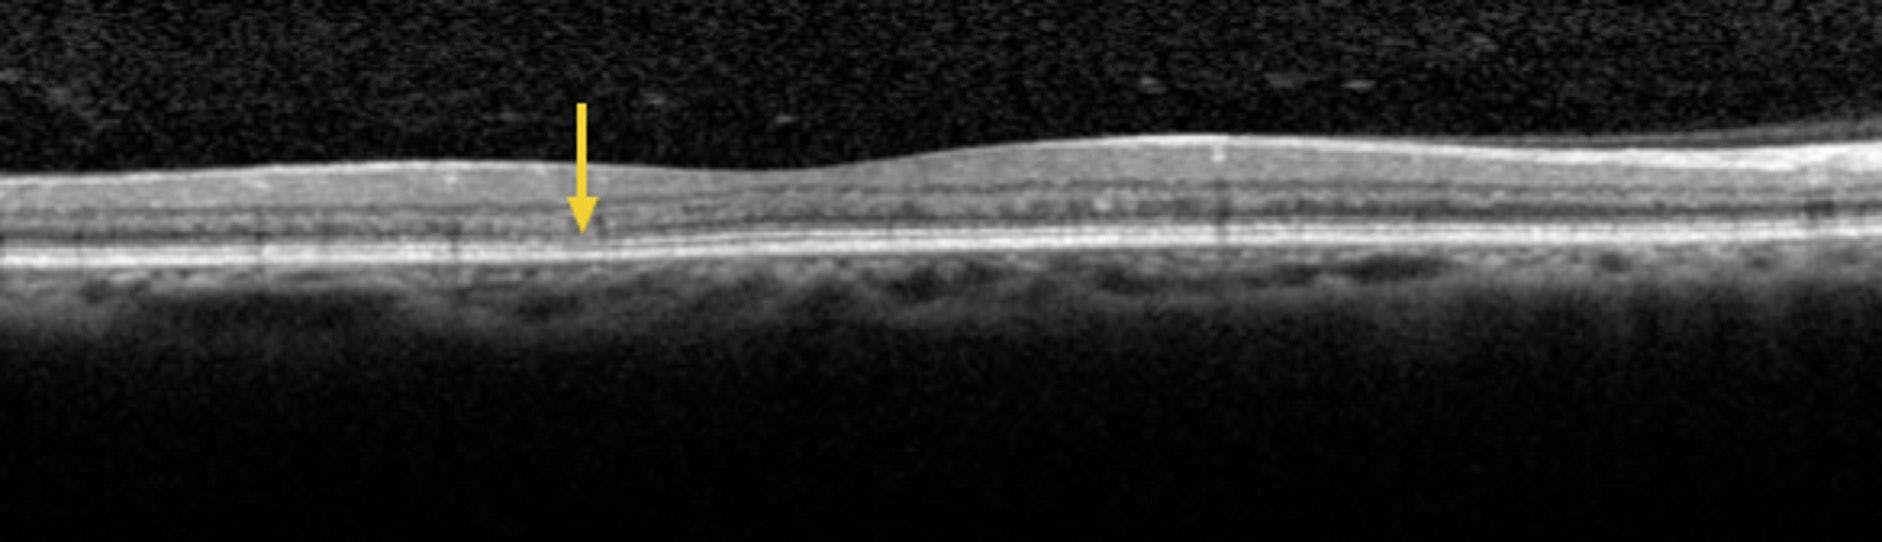 Figure 1. Spectral-domain optical coherence tomography (SD-OCT) of the right eye with scan line adjusted to area just below the fovea. Arrow points to subtle area of attenuation of the external limiting membrane (ELM) and inner segment/outer segment (IS/OS) line.